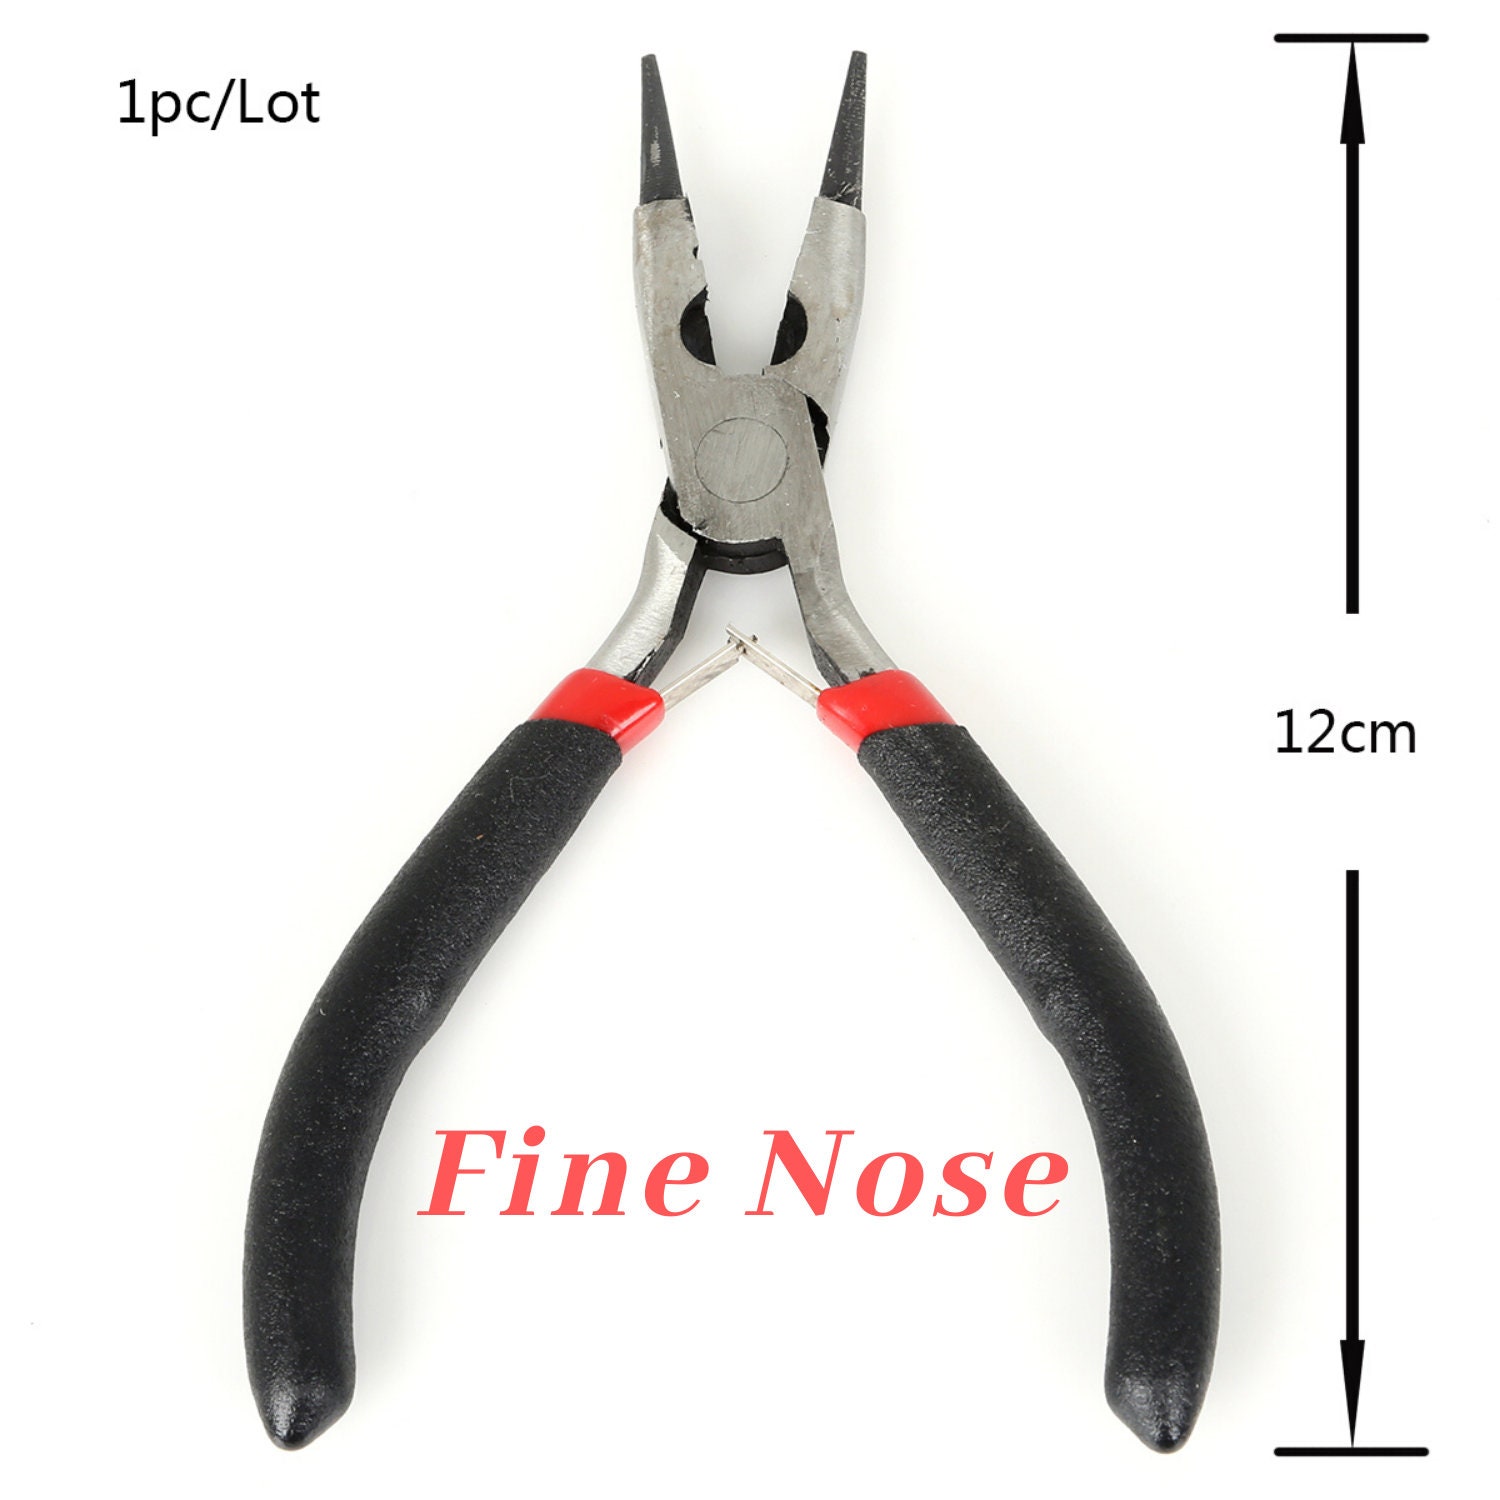 Round Flat Nose Wire-Cutter Jewelry Pliers Yellow Handle Tool for Wire –  VeryCharms